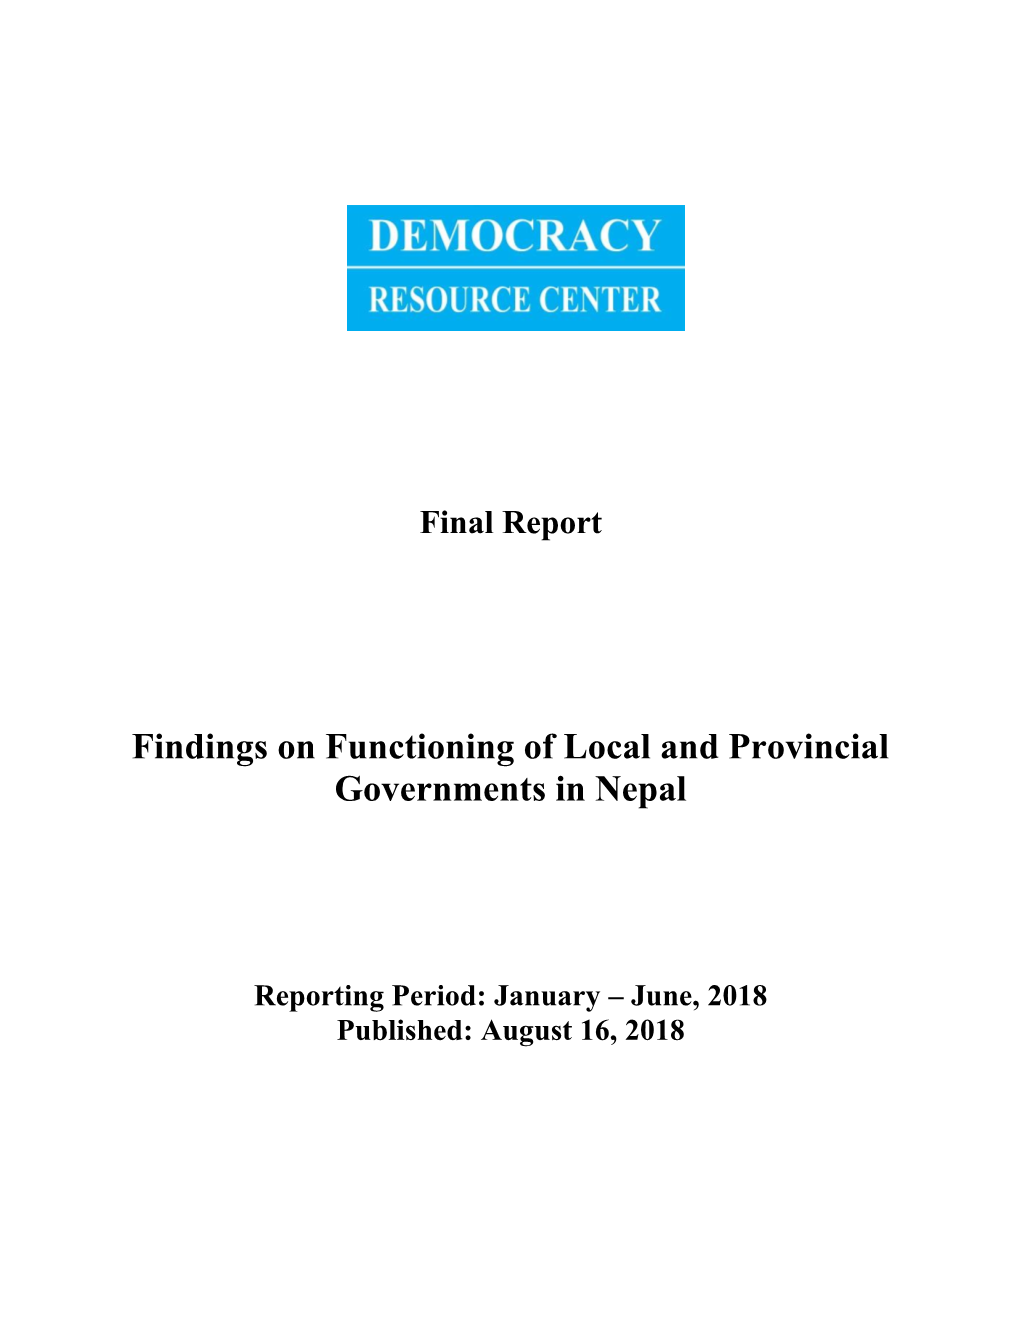 Findings on Functioning of Local and Provincial Governments in Nepal